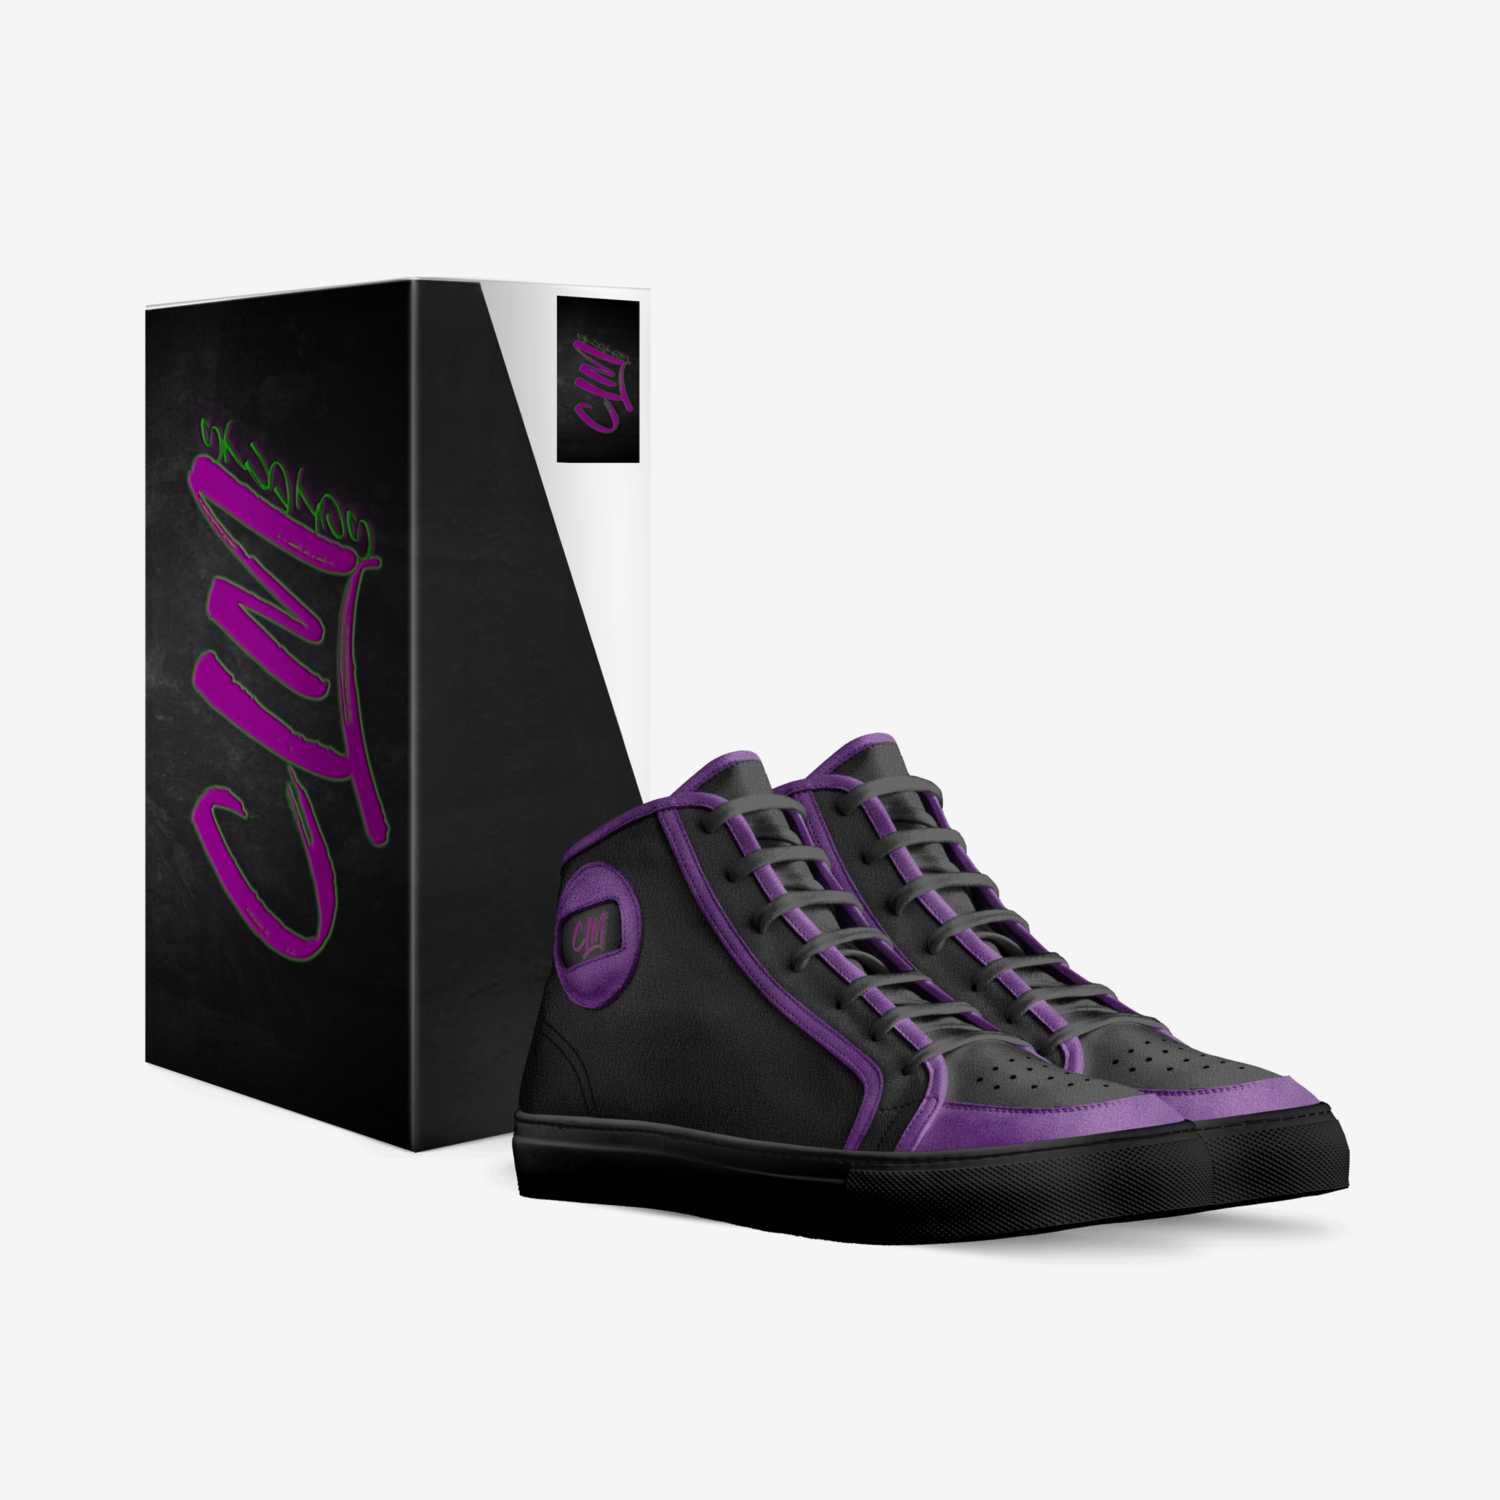 CLM custom made in Italy shoes by Fuquan Conner | Box view